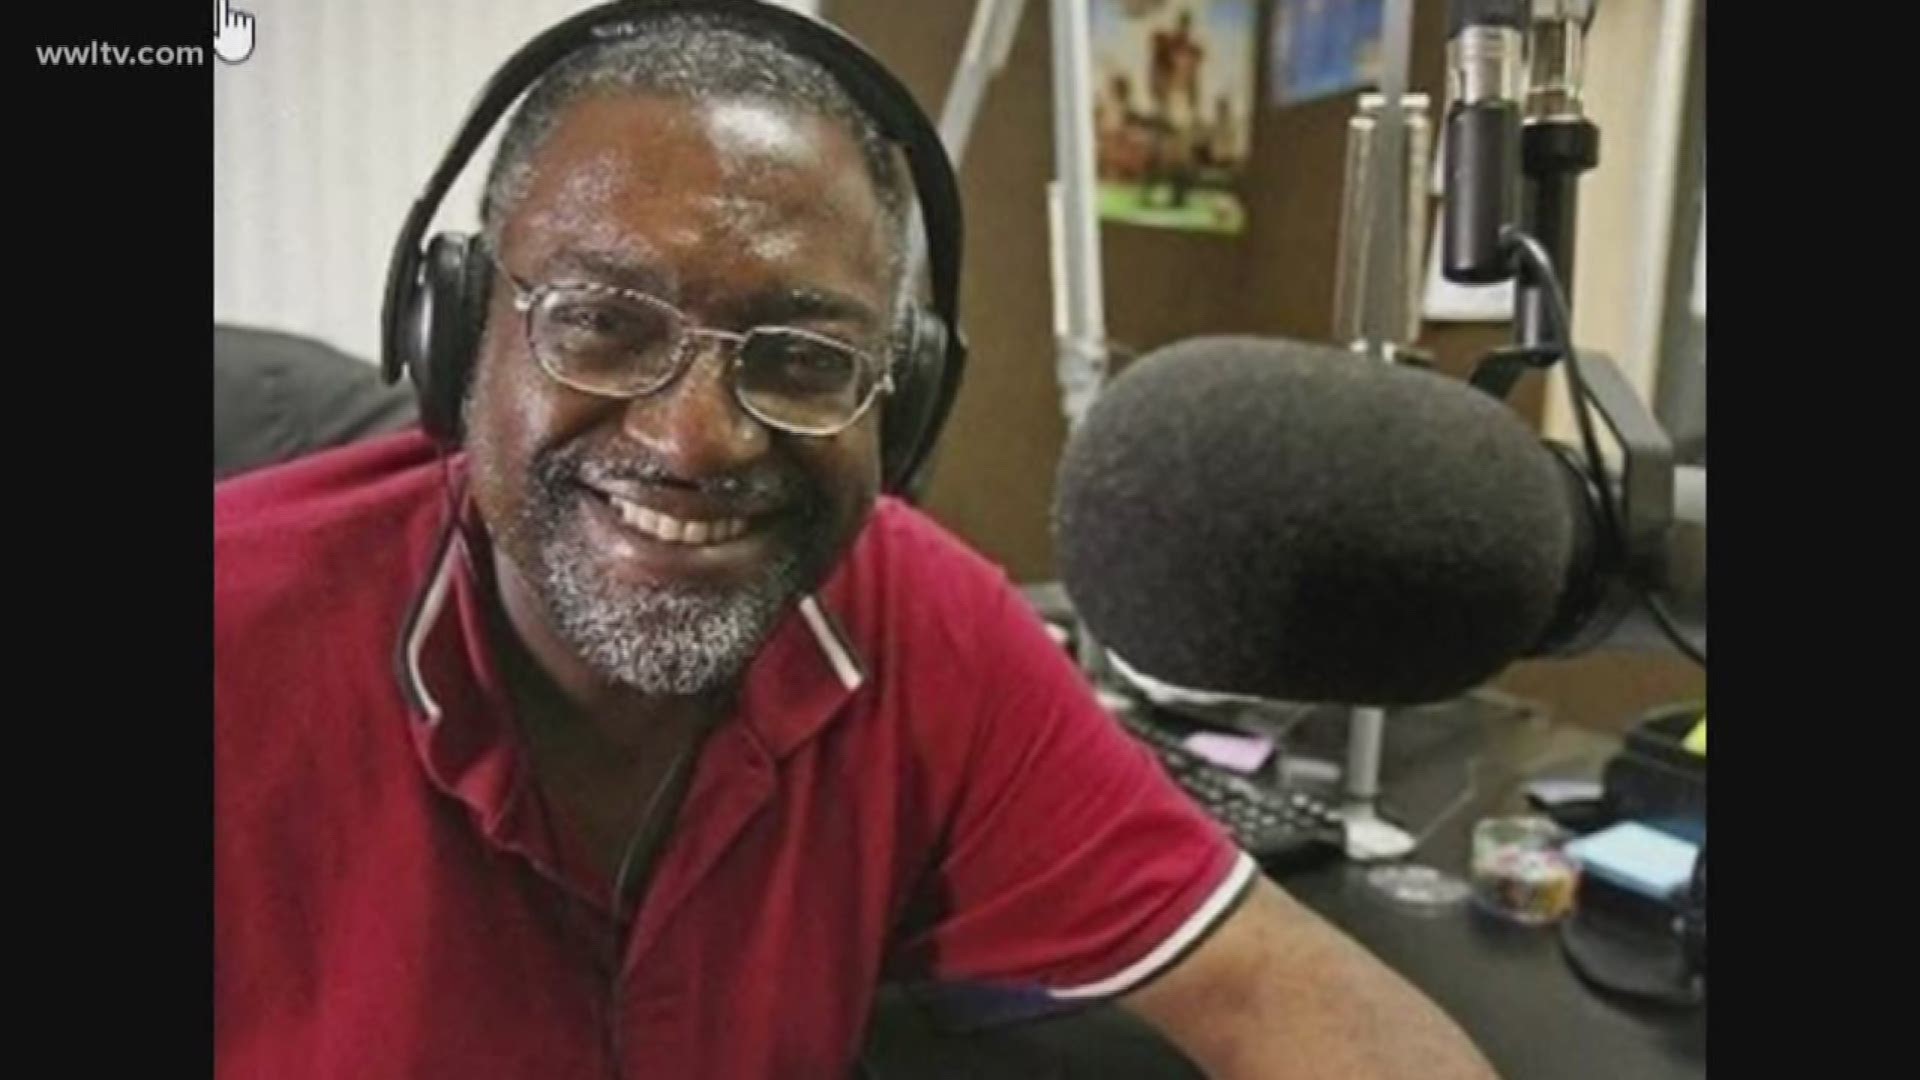 C.J. Morgan, a popular and top-rated morning radio host in New Orleans for nearly two decades, has died. He was 63.